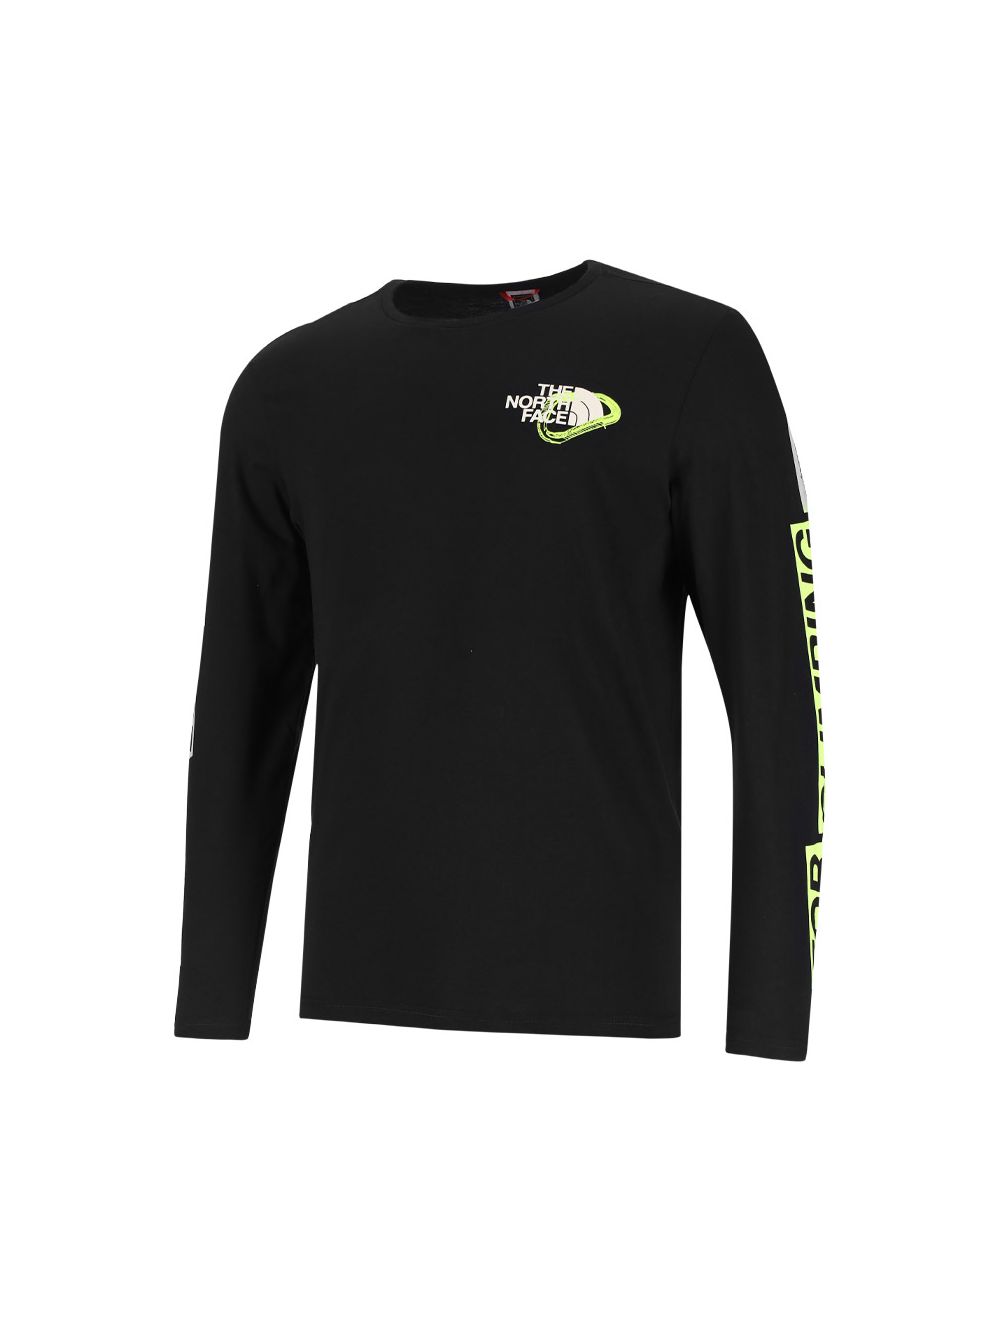 The North Face Outdoor Long Sleeve Graphic T-shirt Mens Black